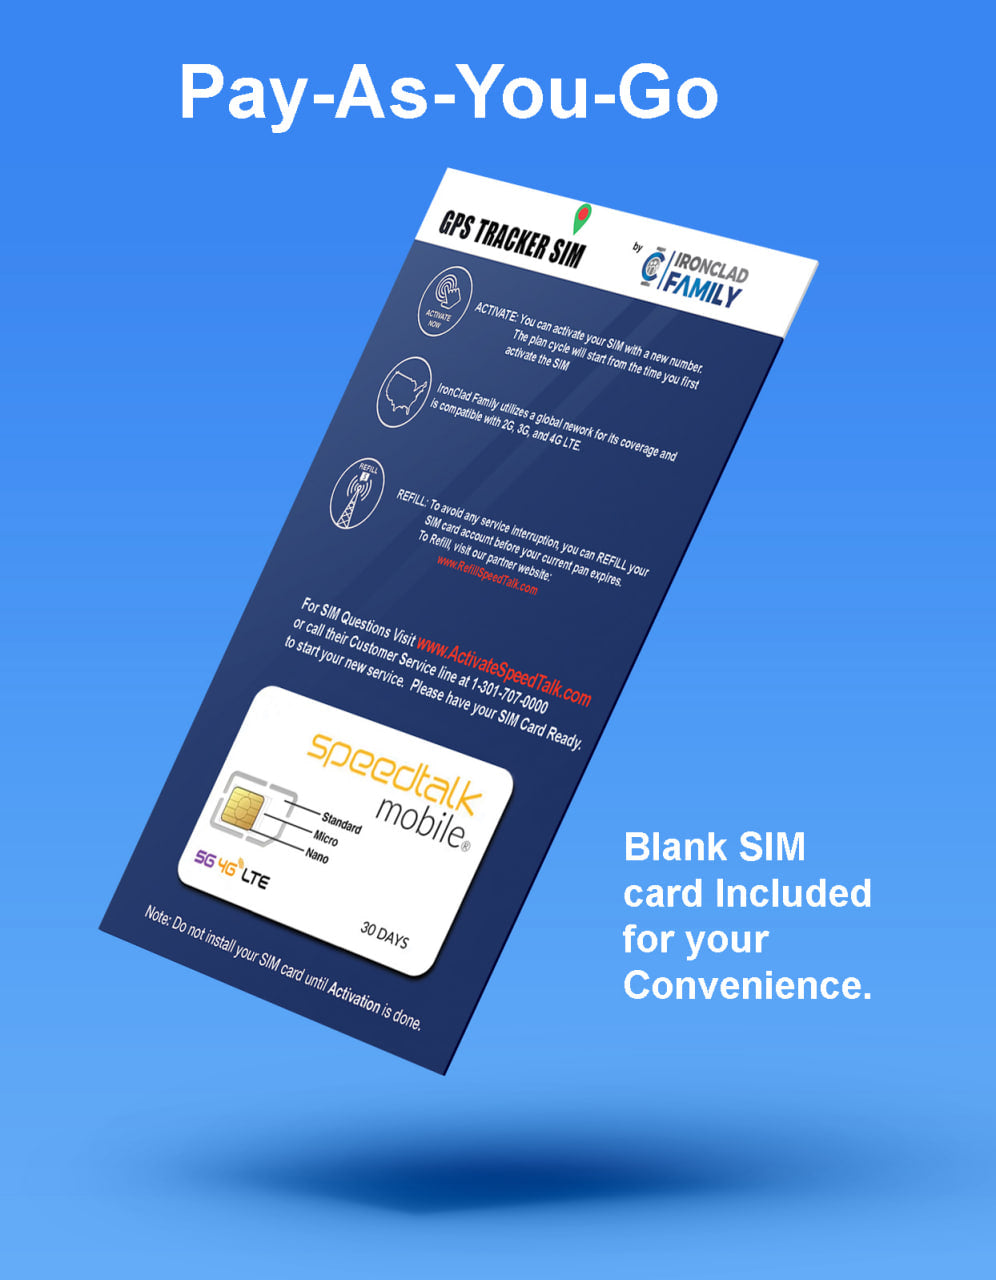 Blank SIM card for pay-as-you-go service with GPS tracker